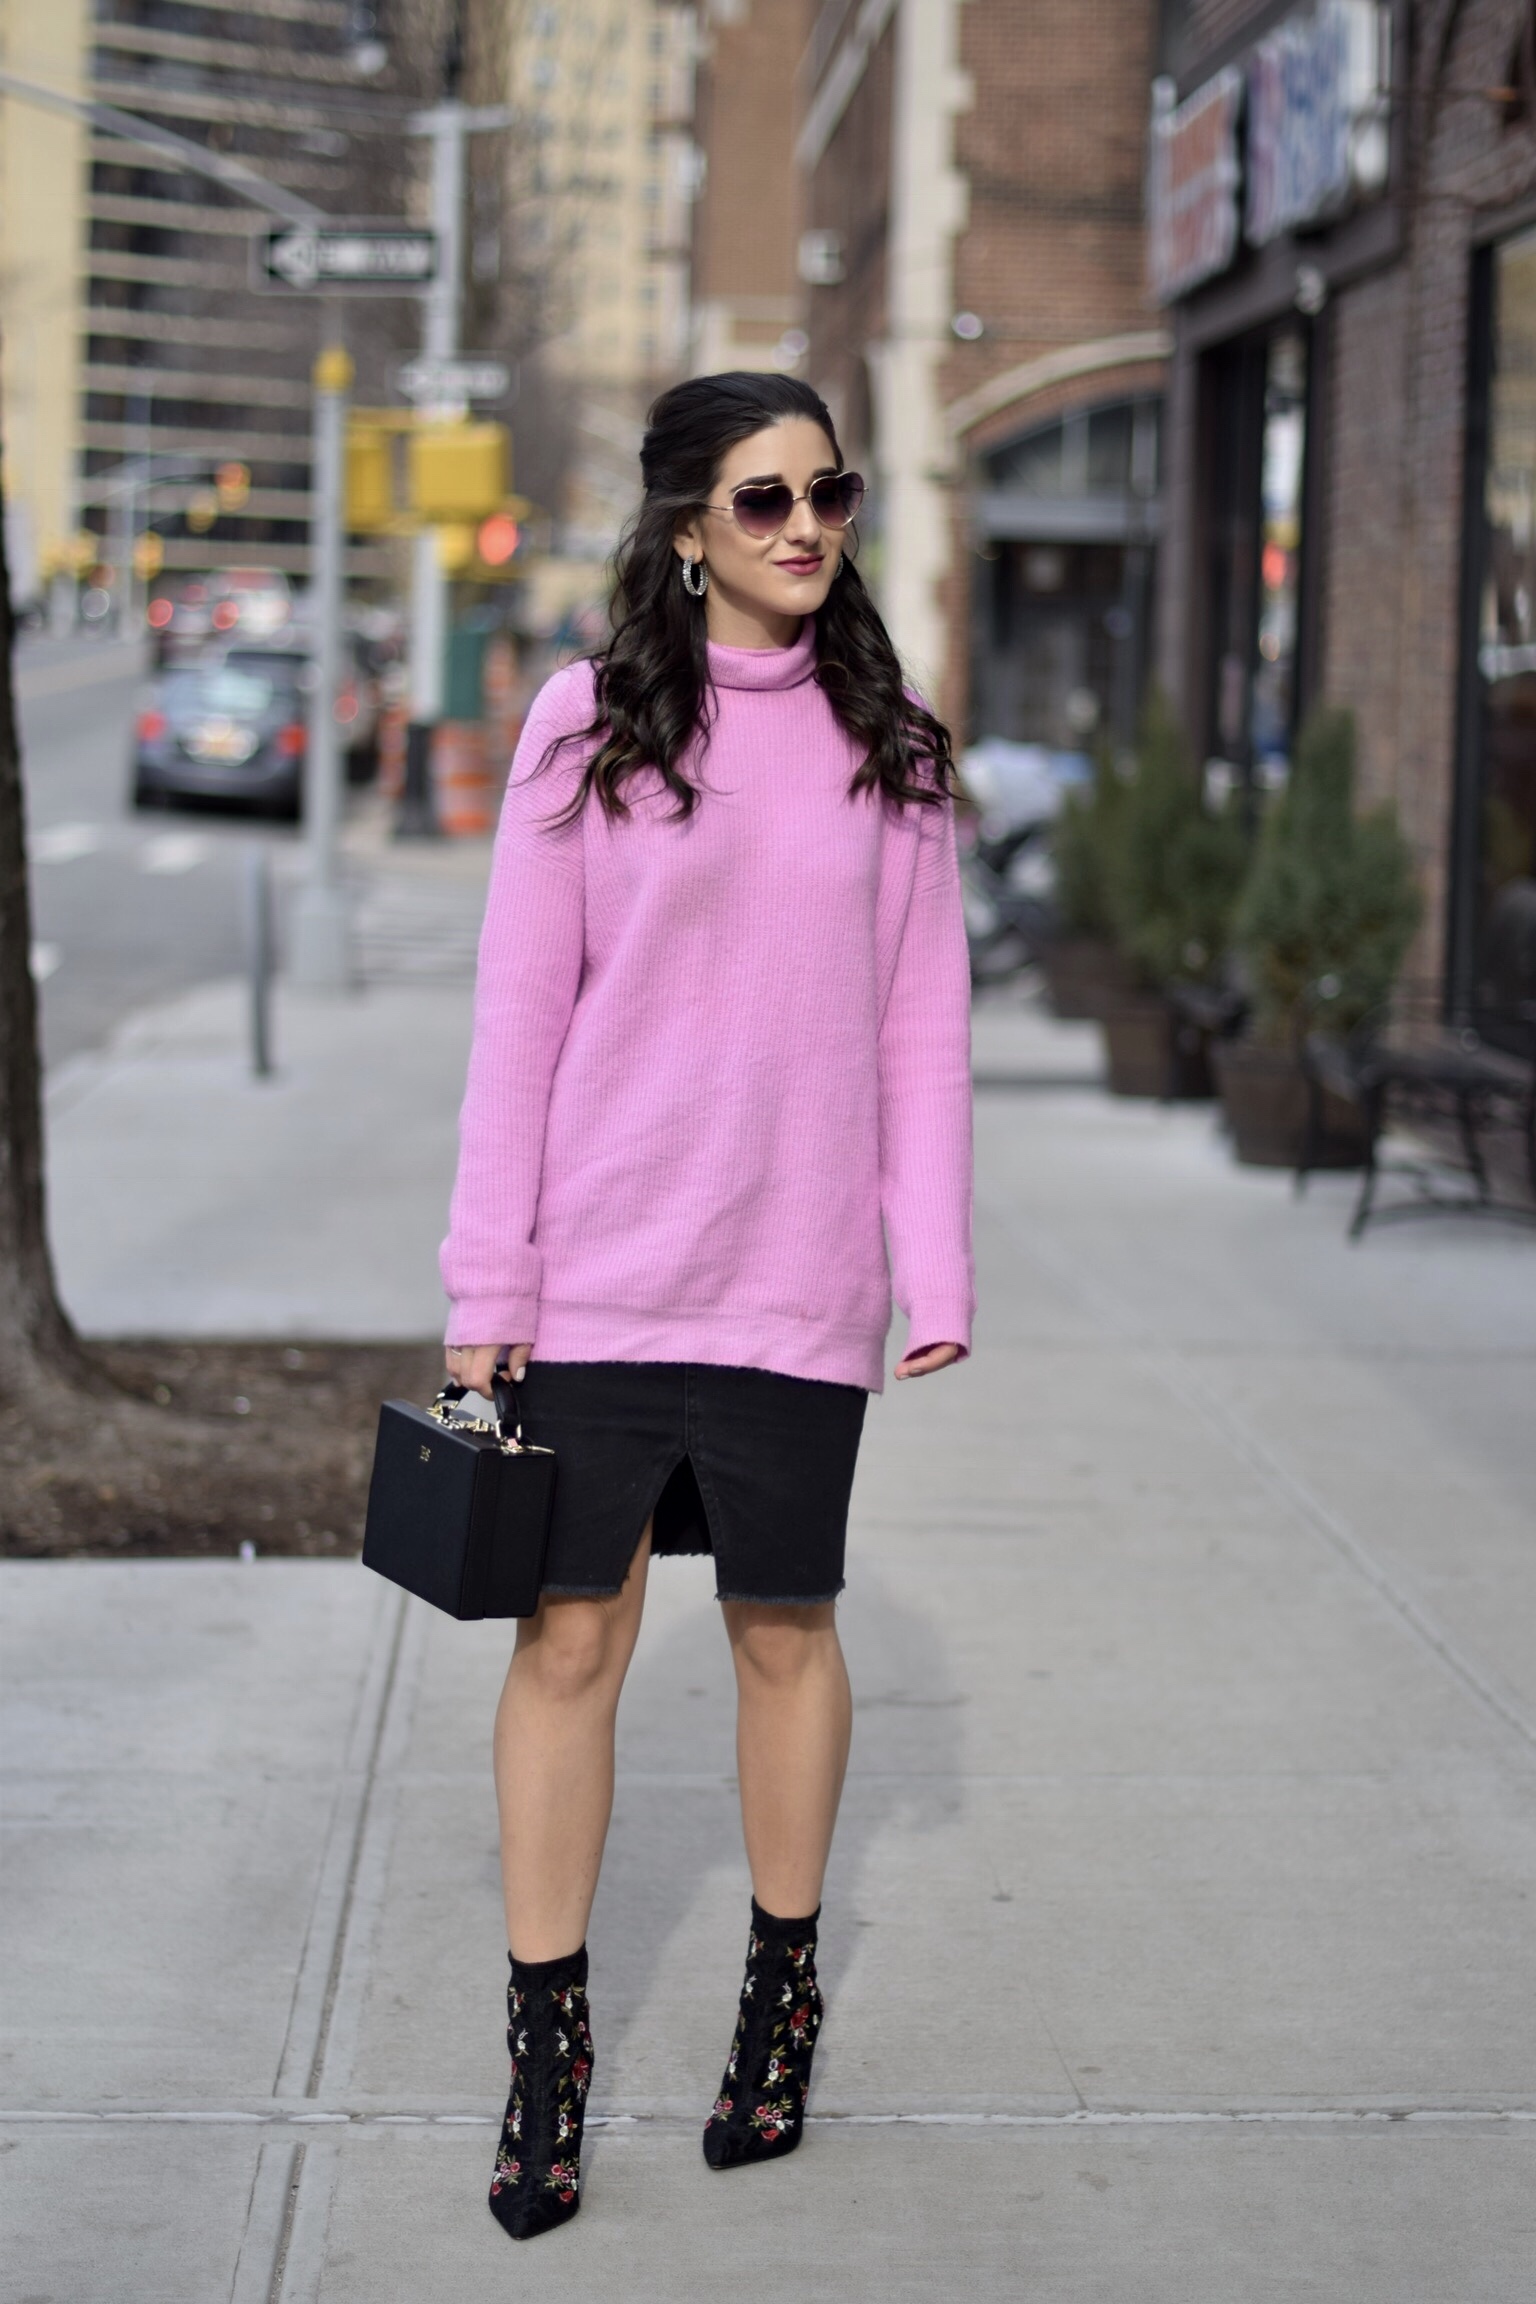 Surviving Winter With ASOS 5 Hardest Parts Of Blogging Esther Santer Fashion Blog NYC Street Style Blogger Outfit OOTD Trendy Pink Sweater Black Denim Skirt Box Bag Floral Booties Betsey Johnson  Girl Women Purse Heart Sunglasses Booties Accesories.jpg